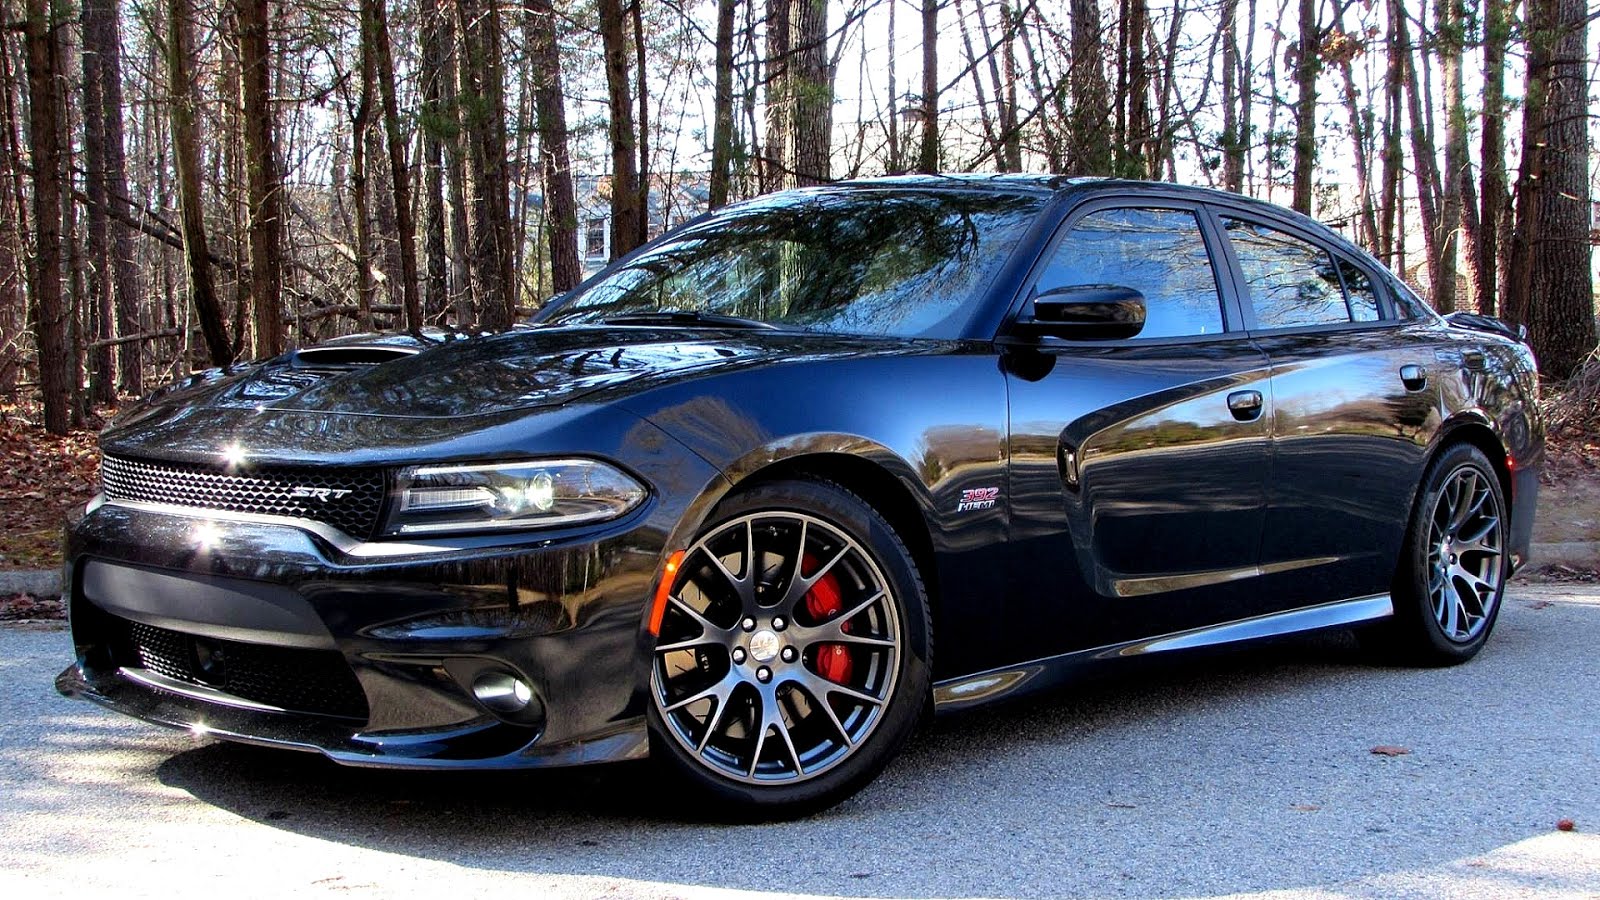 All Black Dodge Charger For Sale - Black Choices